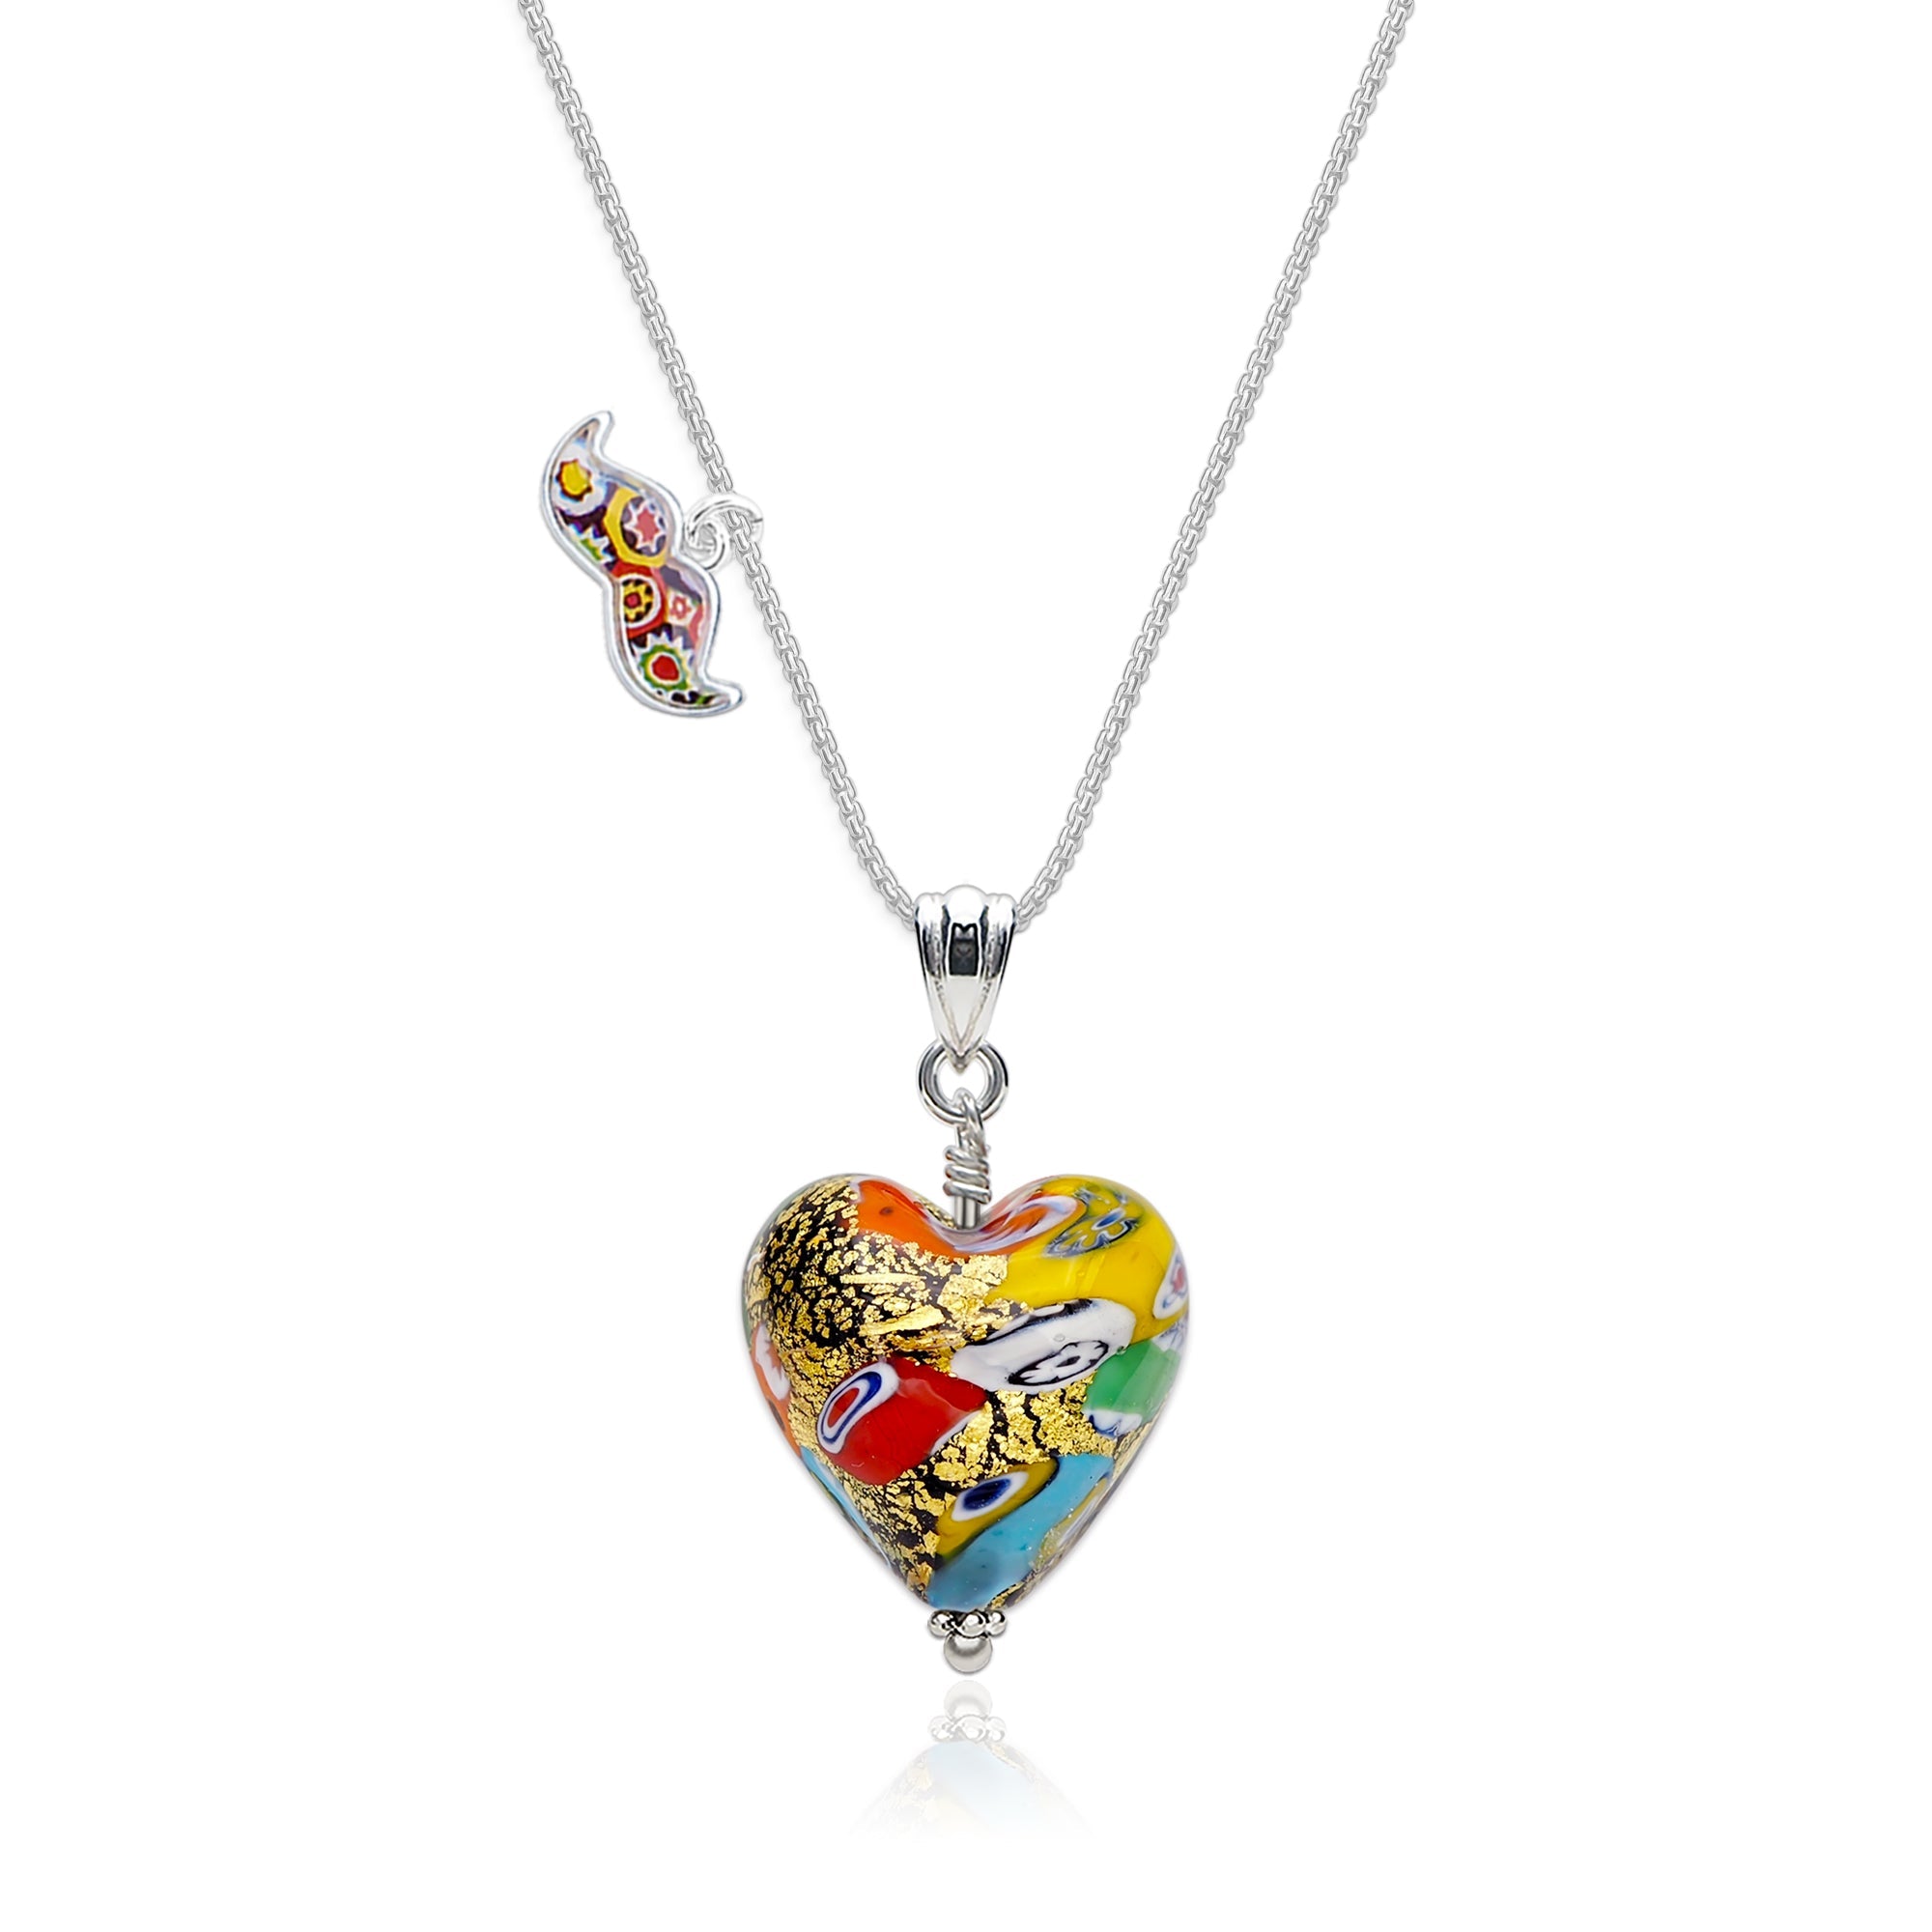 Sterling Silver Classic Heart Locket Pendant Necklace, 19mm pendant, 18  box chain